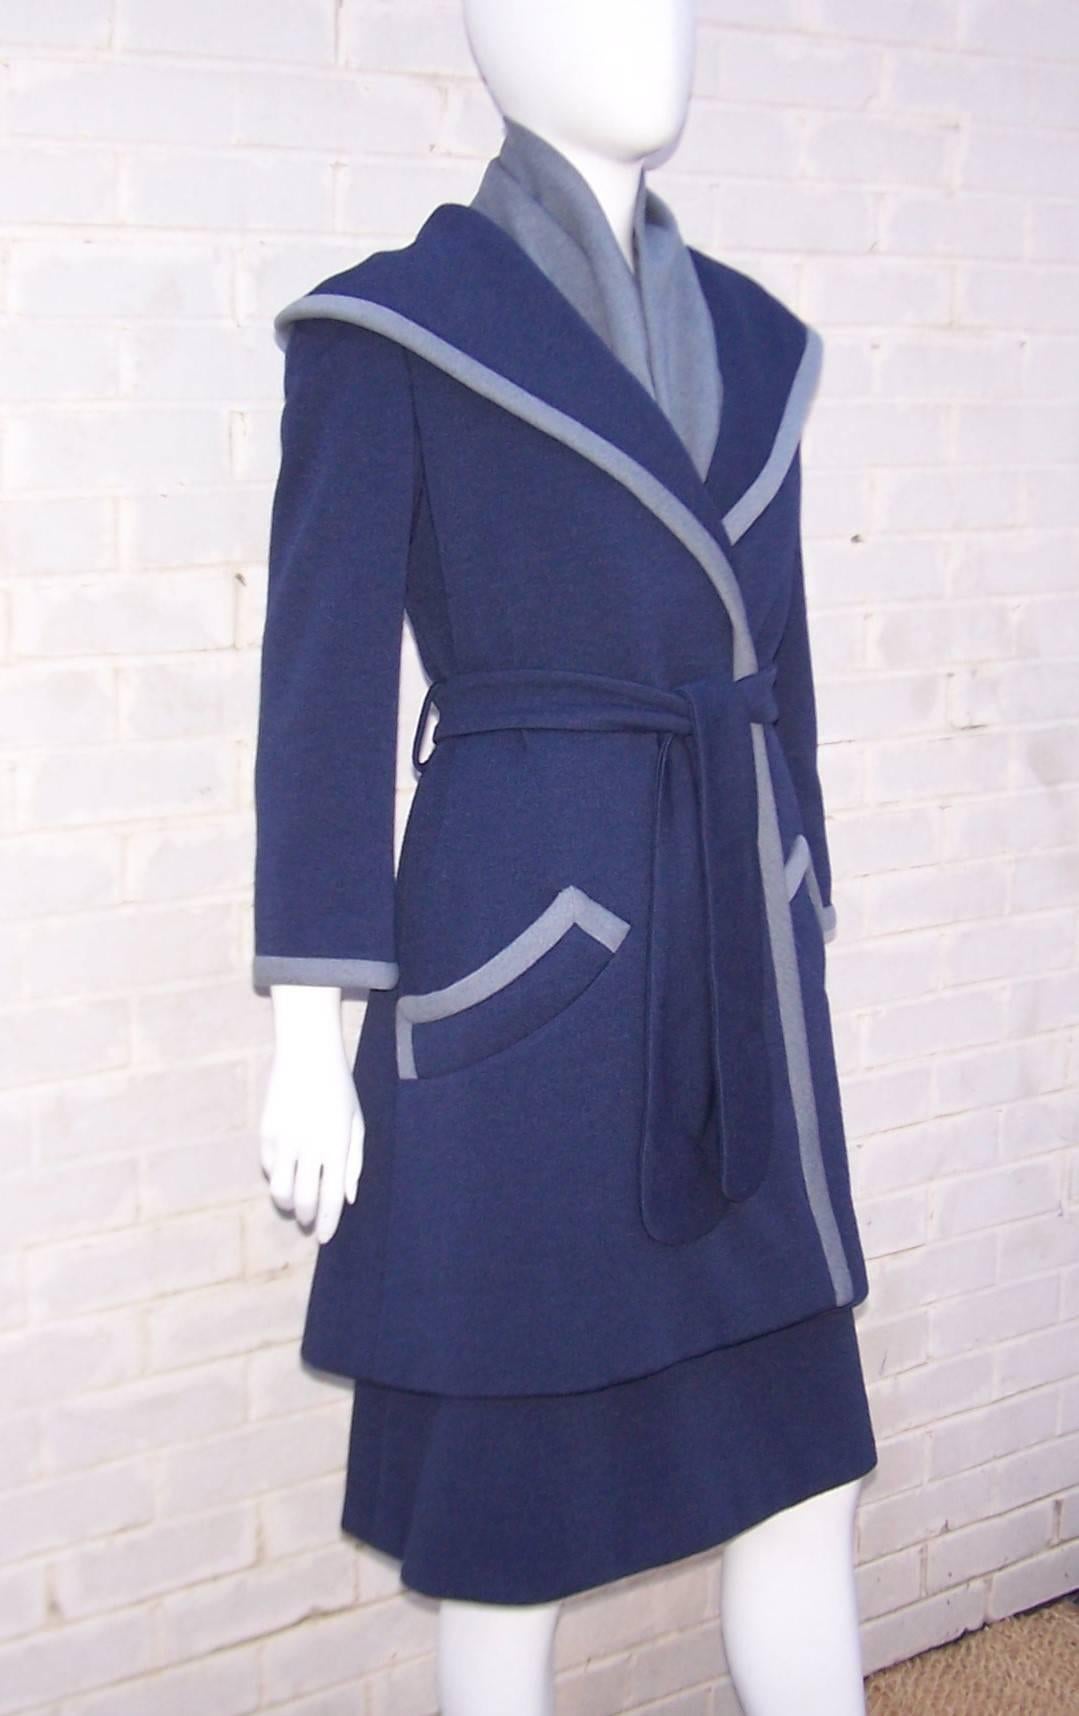 It is a thrill to see this 1960's Geoffrey Beene ensemble in its entirety which includes a dress with belt, a jacket/coat with sash and a neck scarf.  Lots of parts ... lots of looks!  All pieces are made from a heavy weight wool knit in